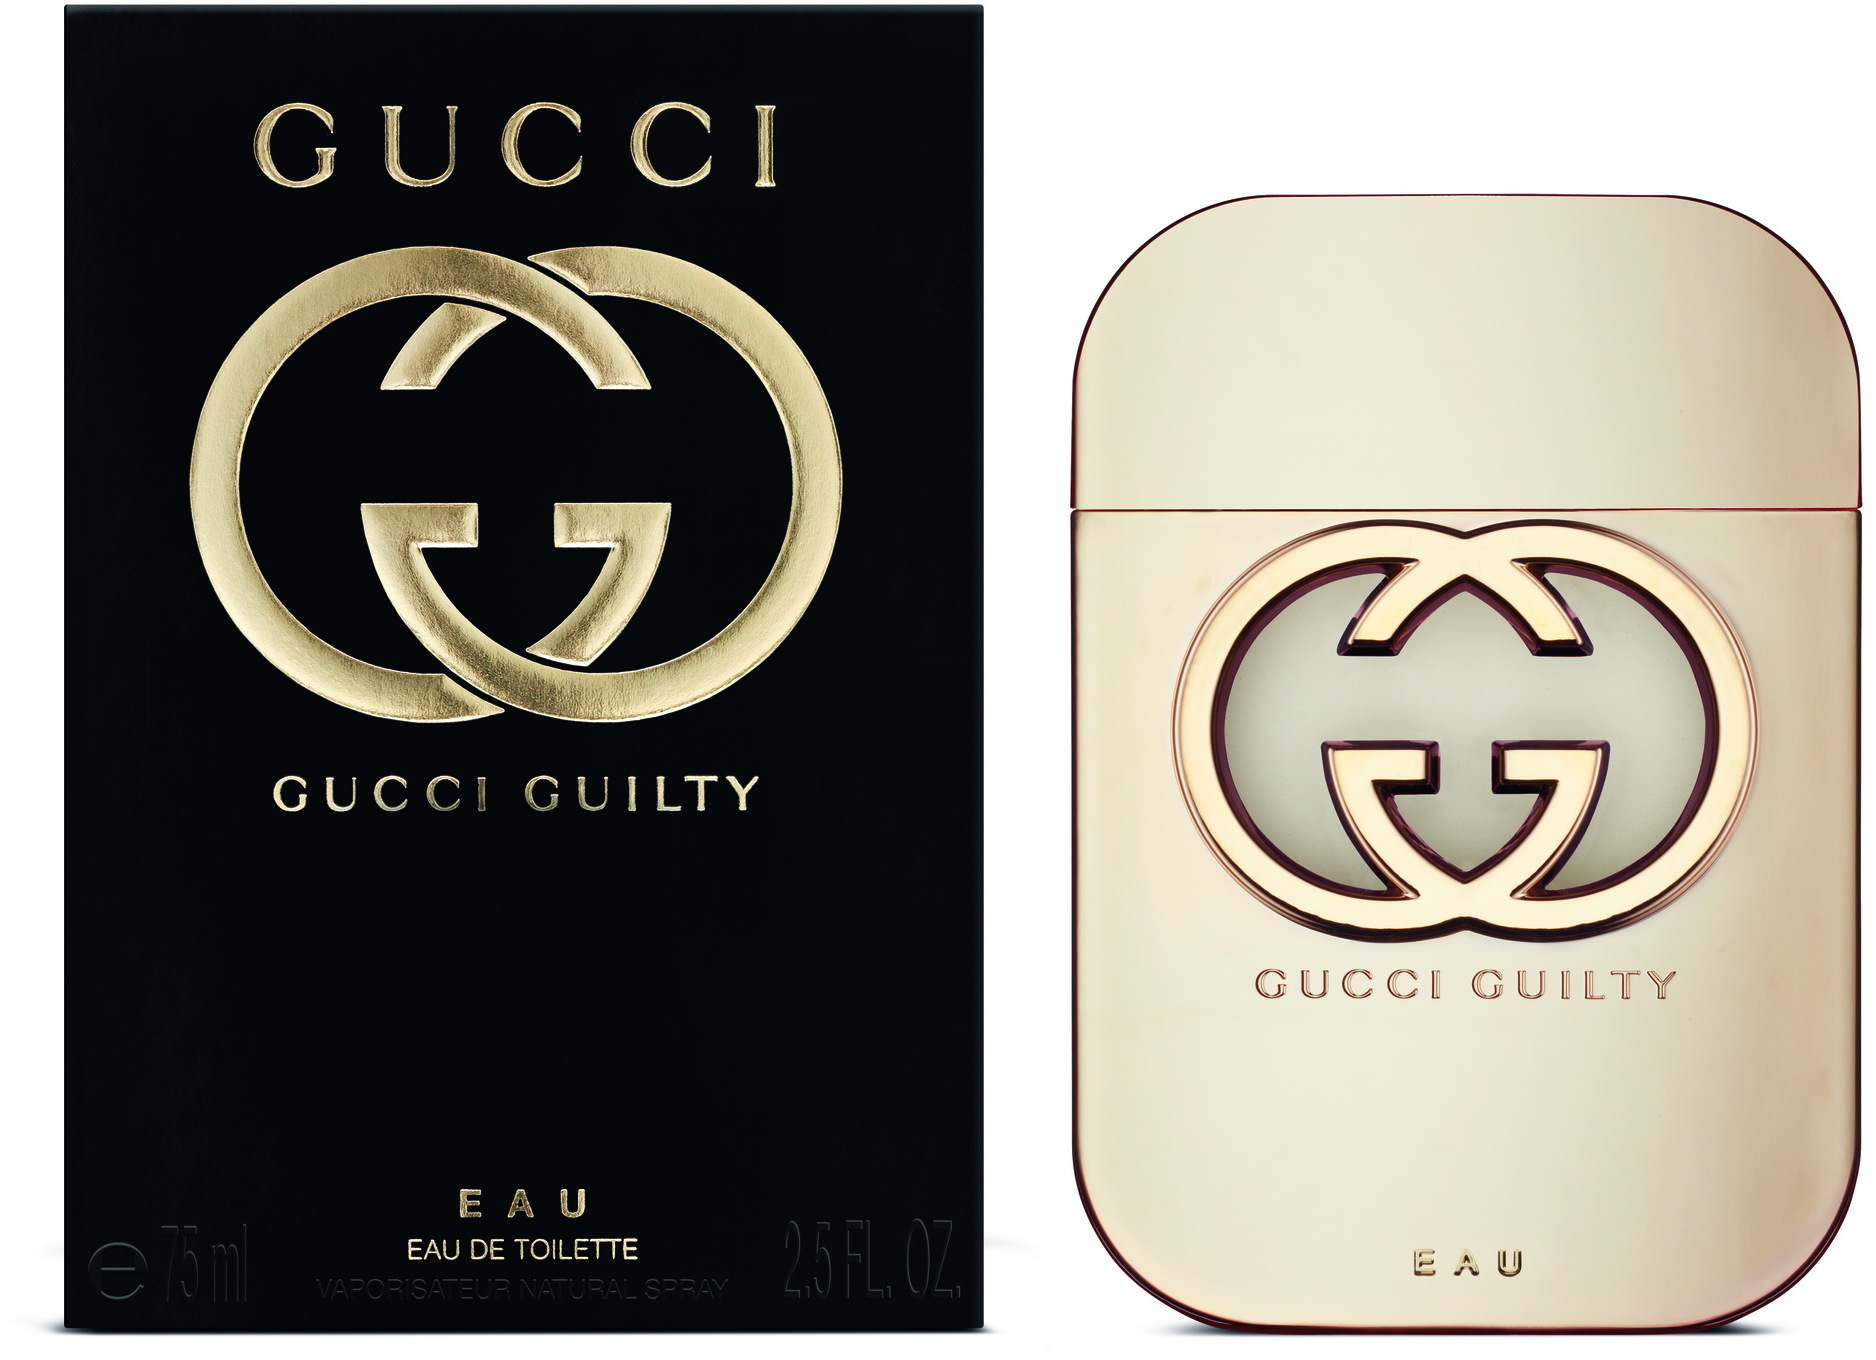 gucci guilty 75ml